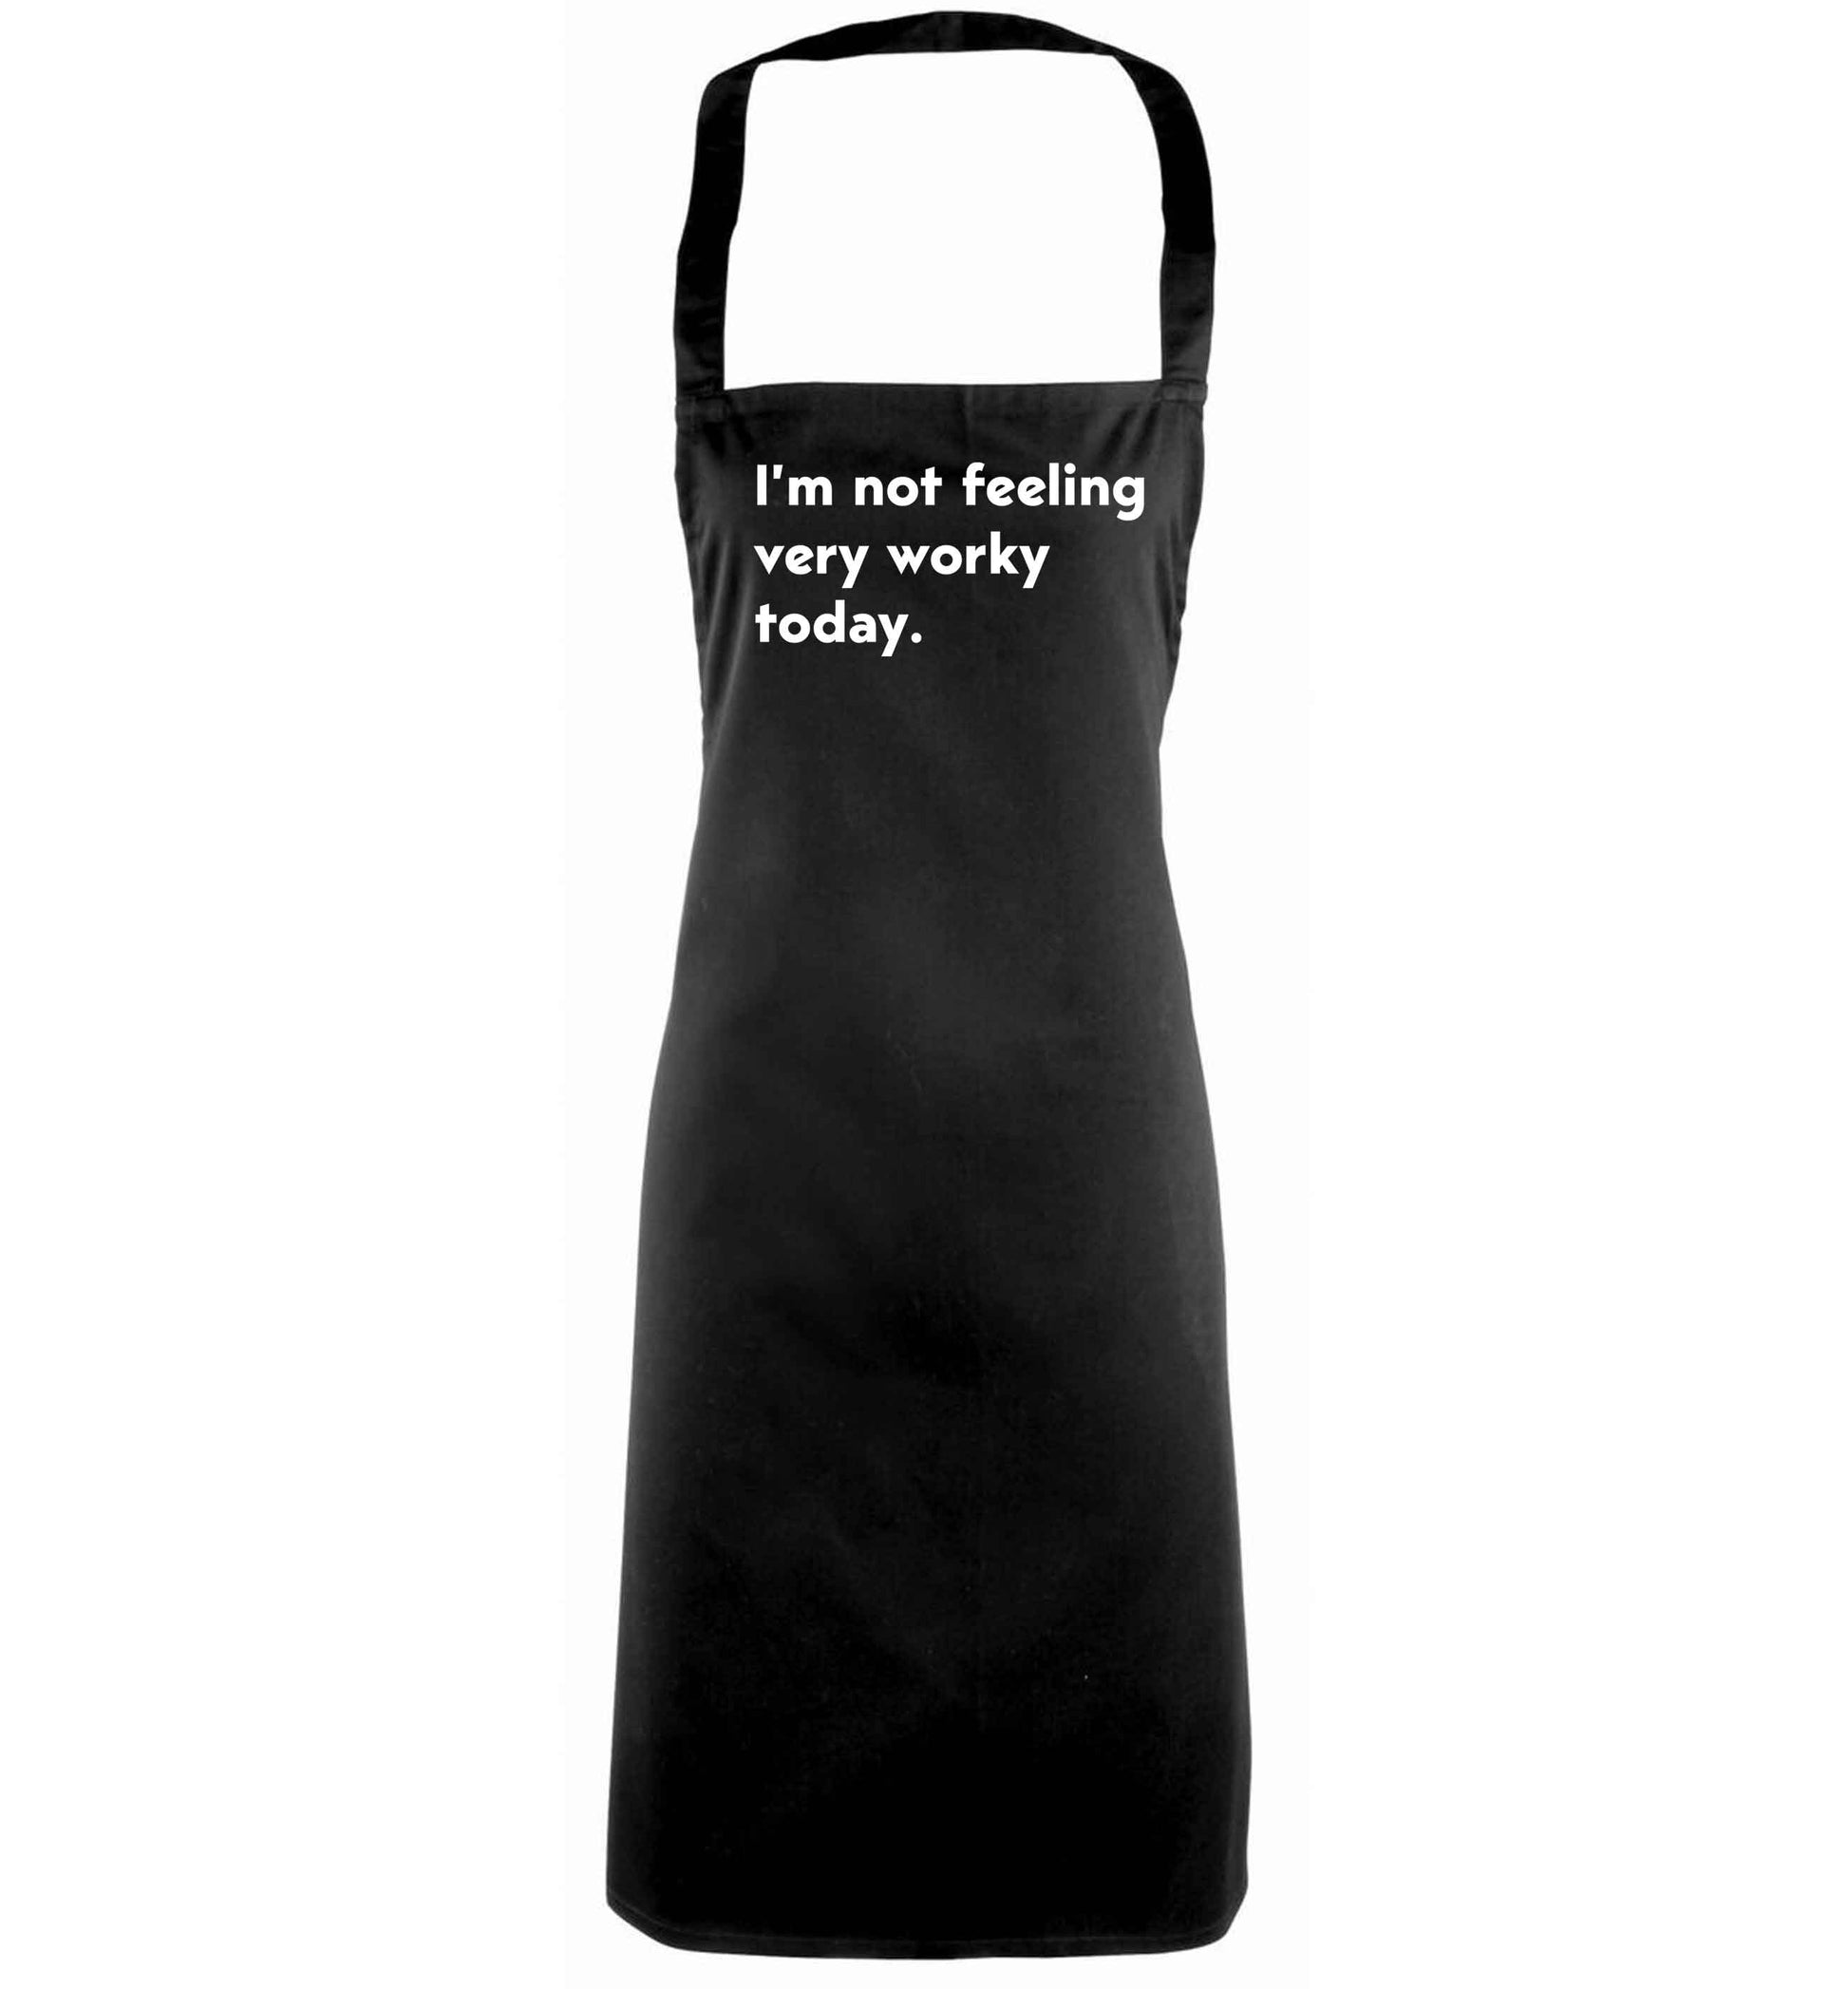 I'm not feeling very worky today black apron